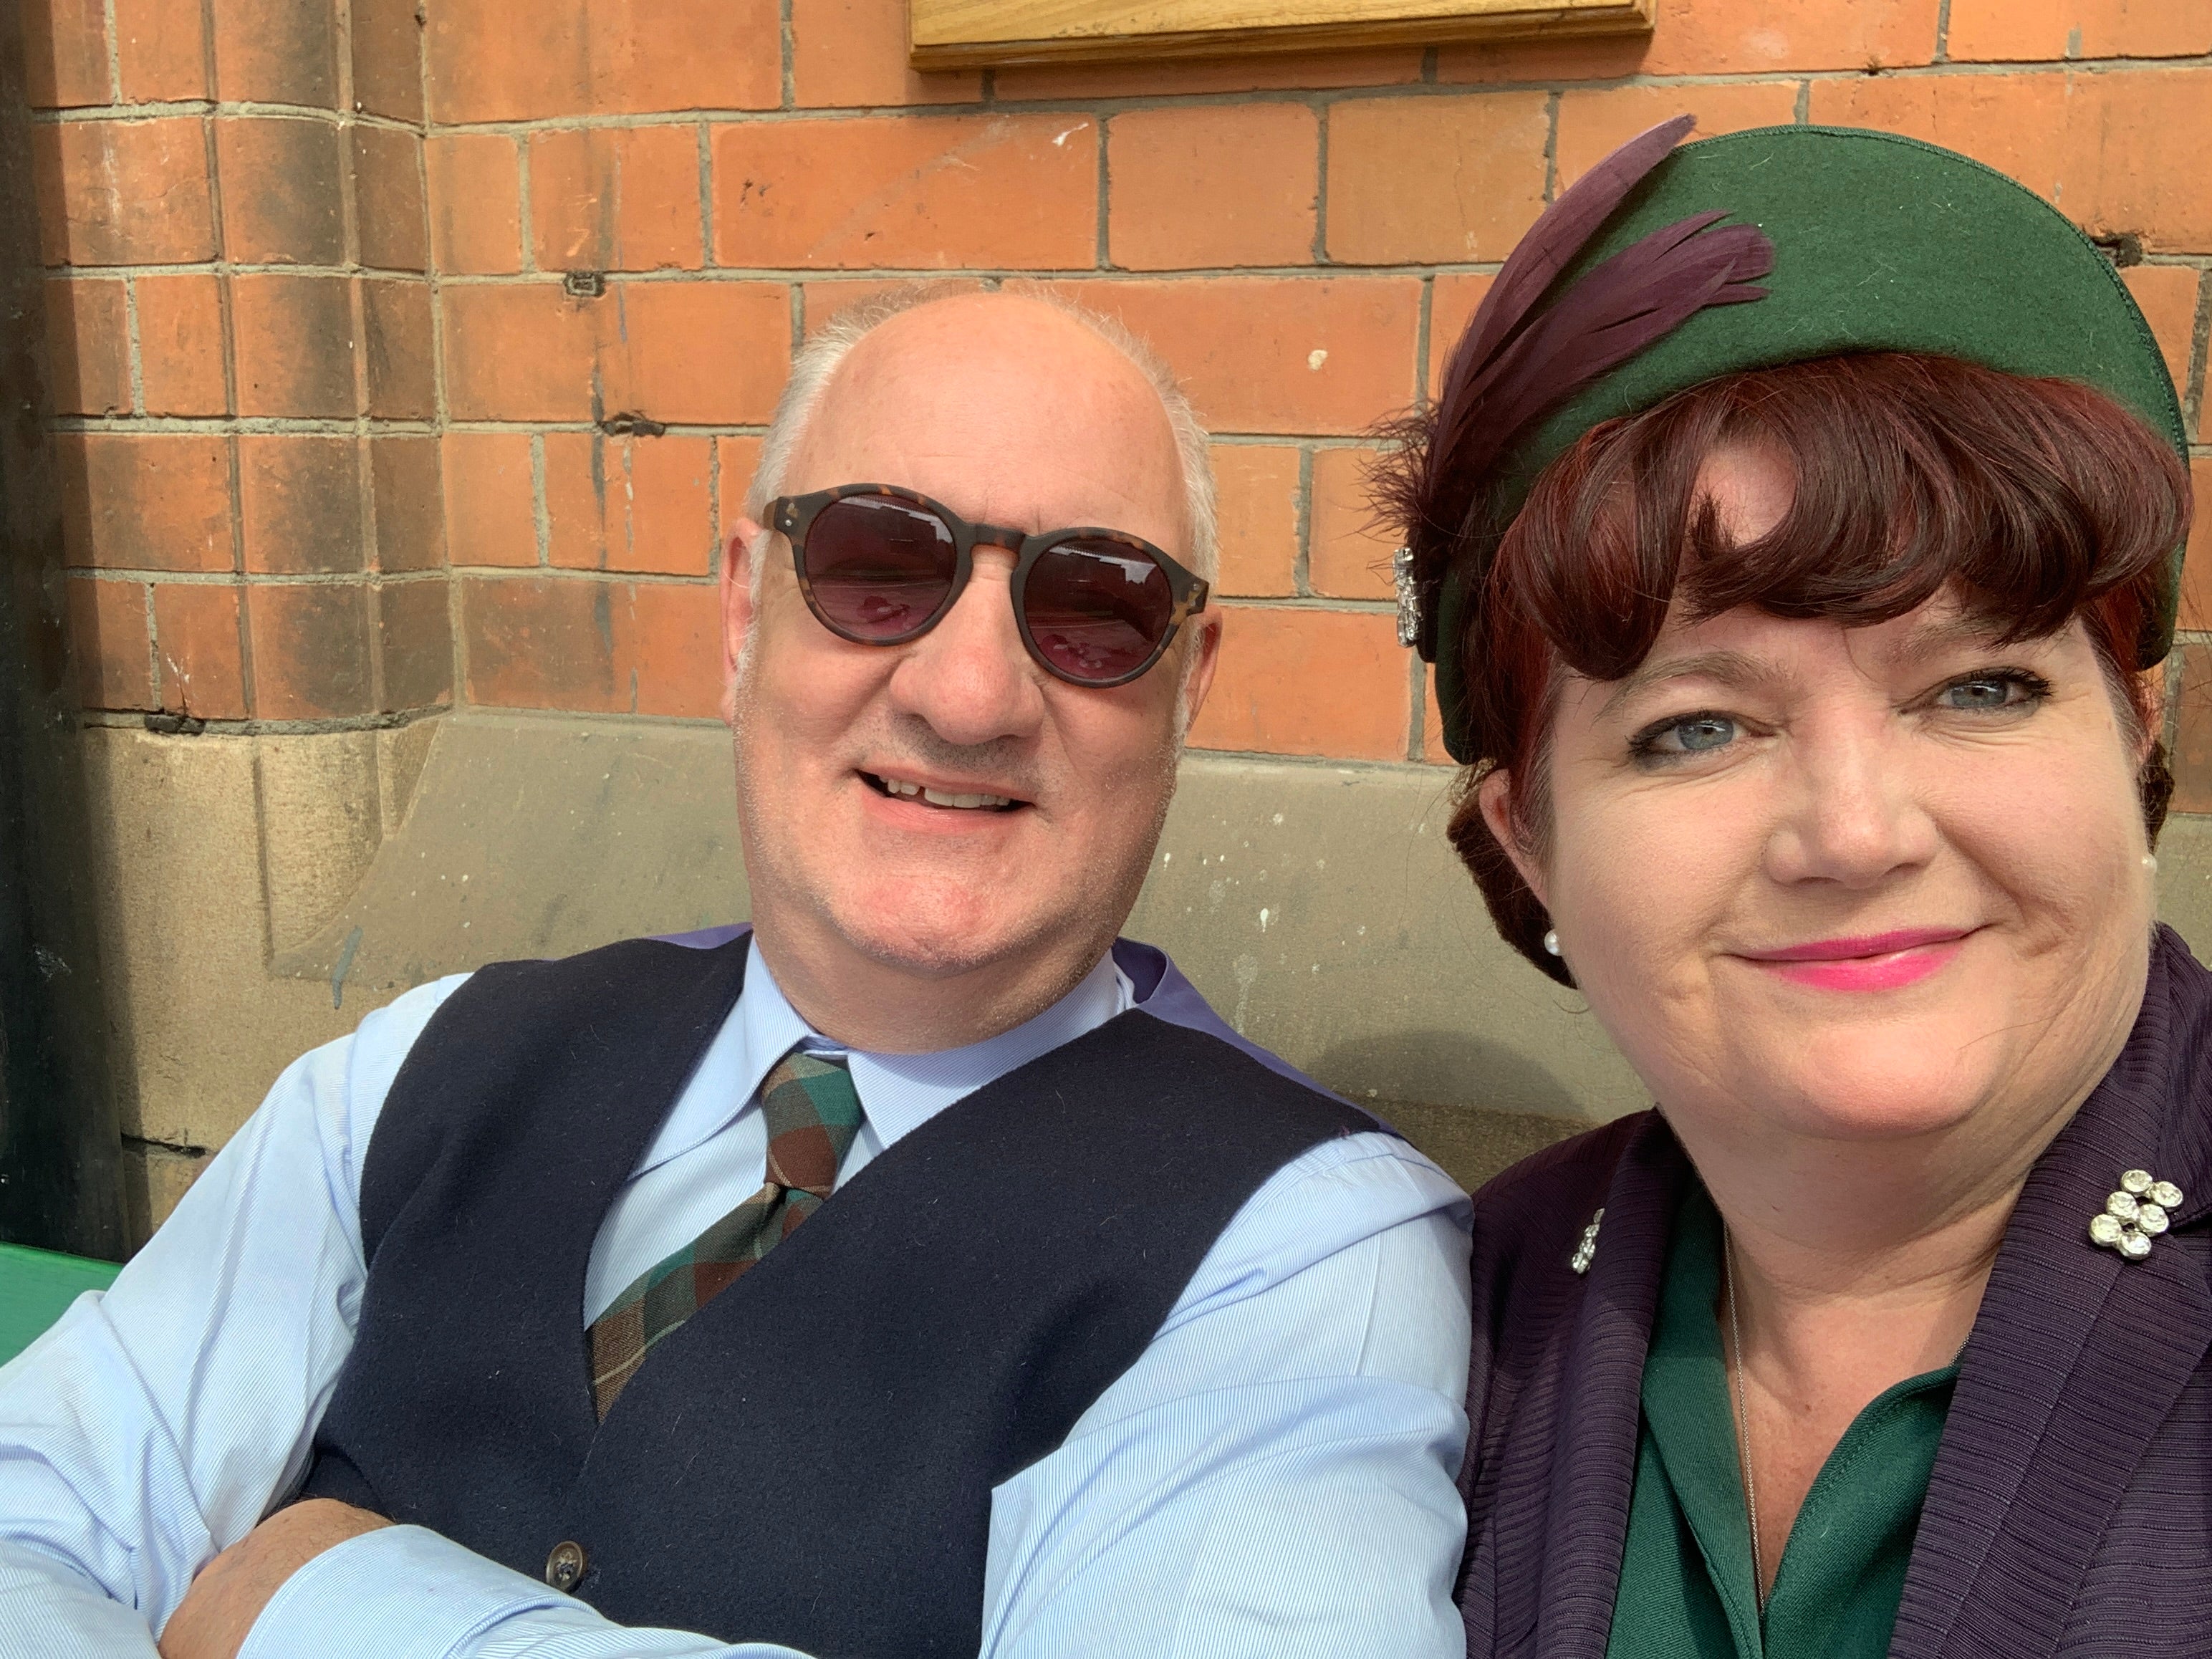 Teresa Fisher, 50, from Stone in Staffordshire took up the hobby in 2018 with her husband Steve, 62, and became hooked after enjoying their first 1940s event at a heritage railway station. (Teresa Fisher/PA)